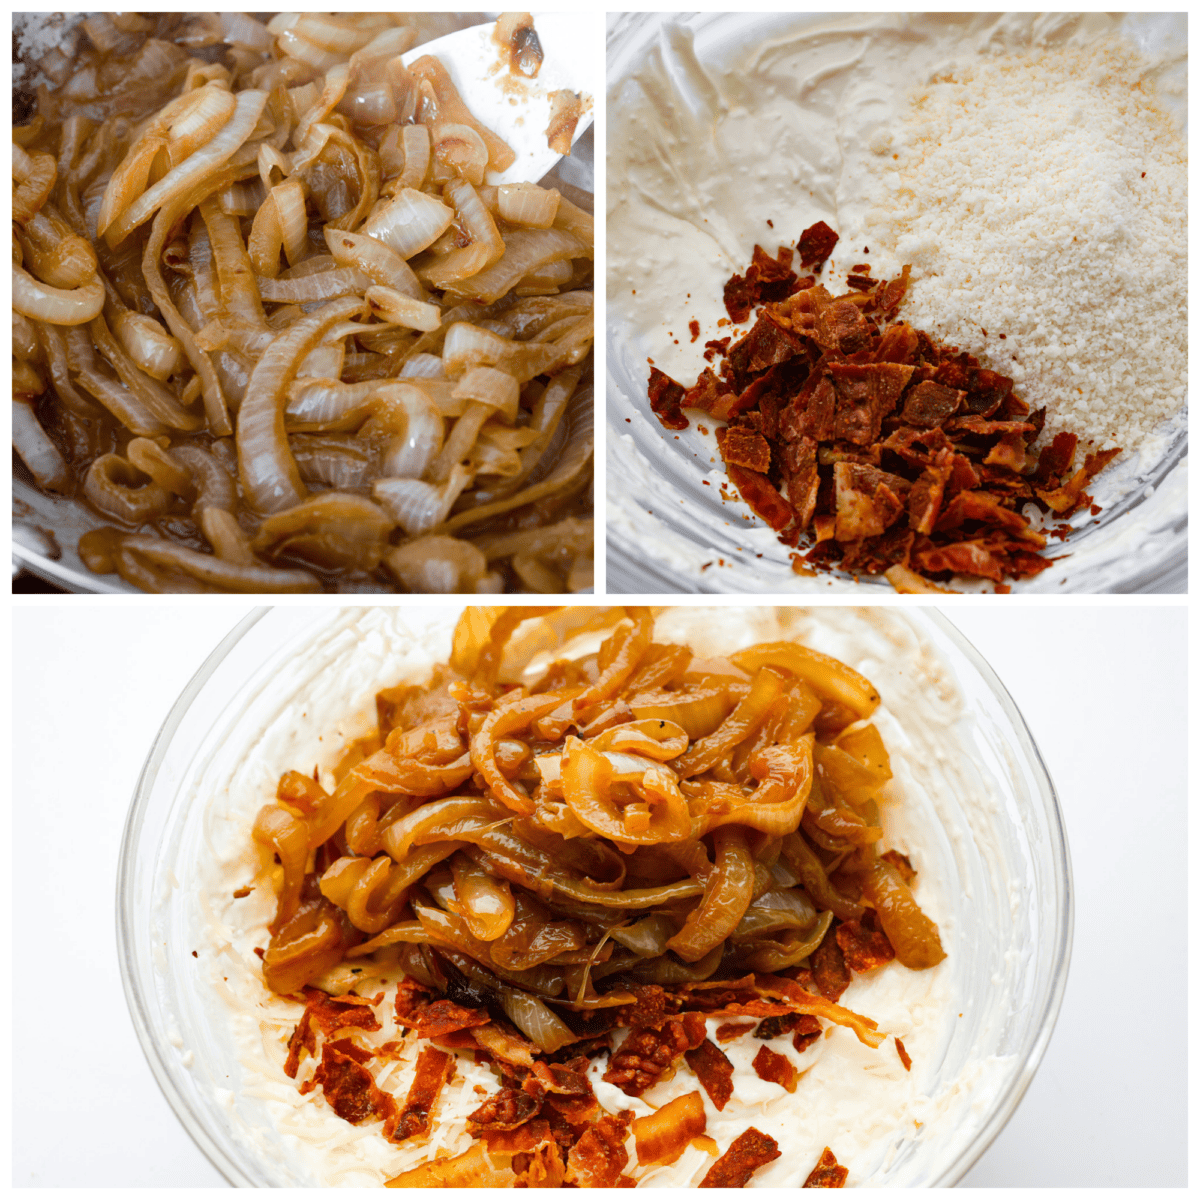 4-photo collage of the onions being caramelized and combined with the other ingredients.